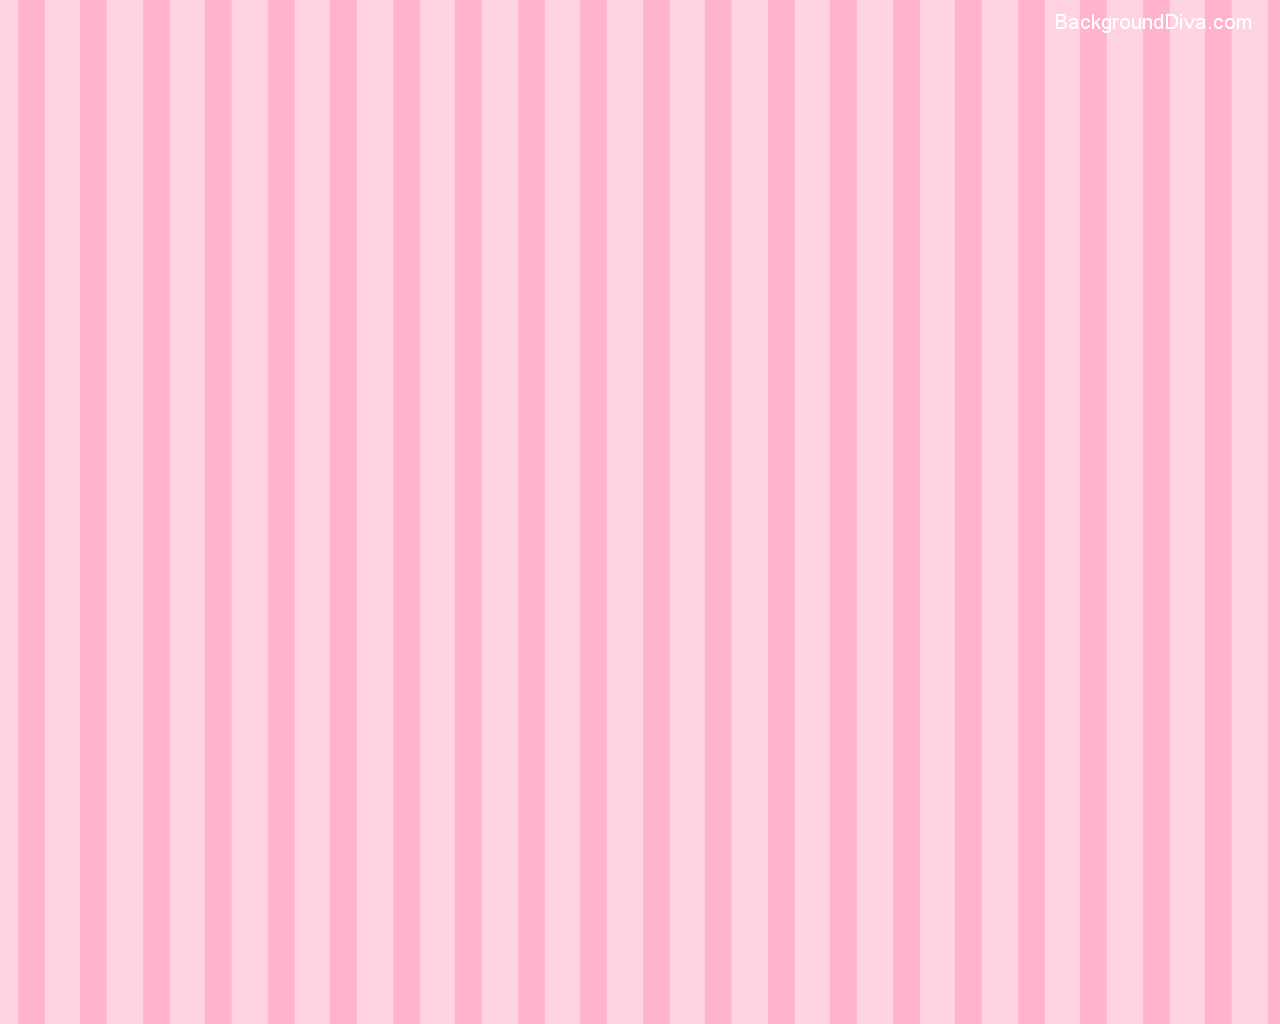 Light Pink Striped Wallpaper Image & Picture